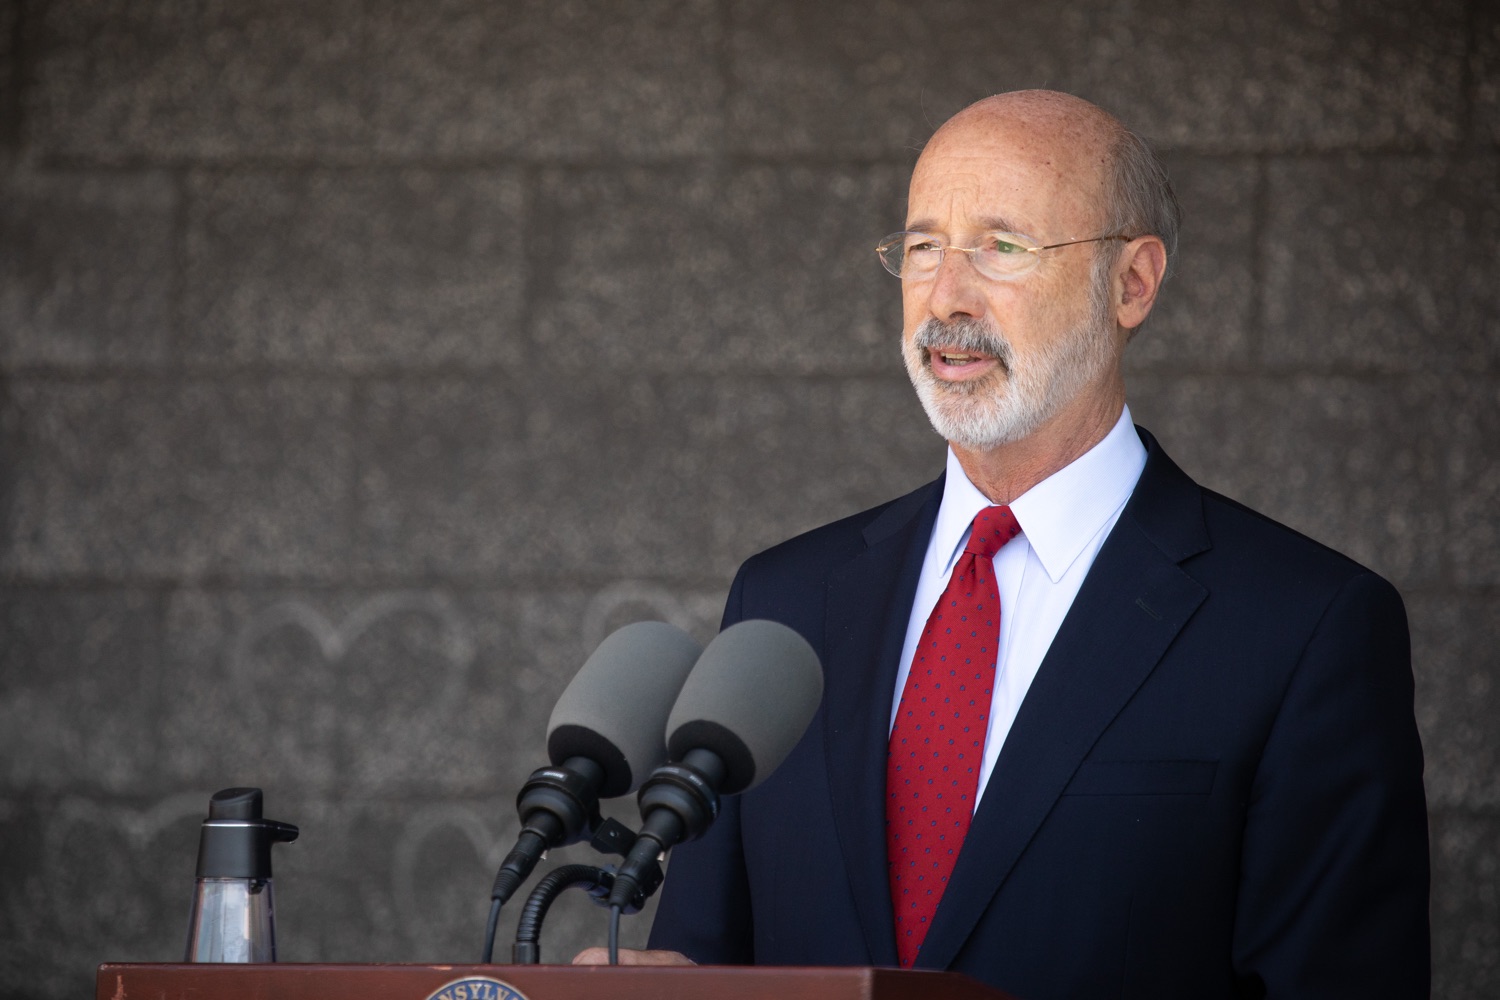 Pennsylvania Governor Tom Wolf speaking with the press.  Governor Tom Wolf visited the child care center at PSECU headquarters in Harrisburg today to announce $53 million in additional financial support for child care providers that have suffered during COVID-19.  Harrisburg, PA  July 6, 2020..<br><a href="https://filesource.amperwave.net/commonwealthofpa/photo/18143_gov_cares_dz_18.jpg" target="_blank">⇣ Download Photo</a>